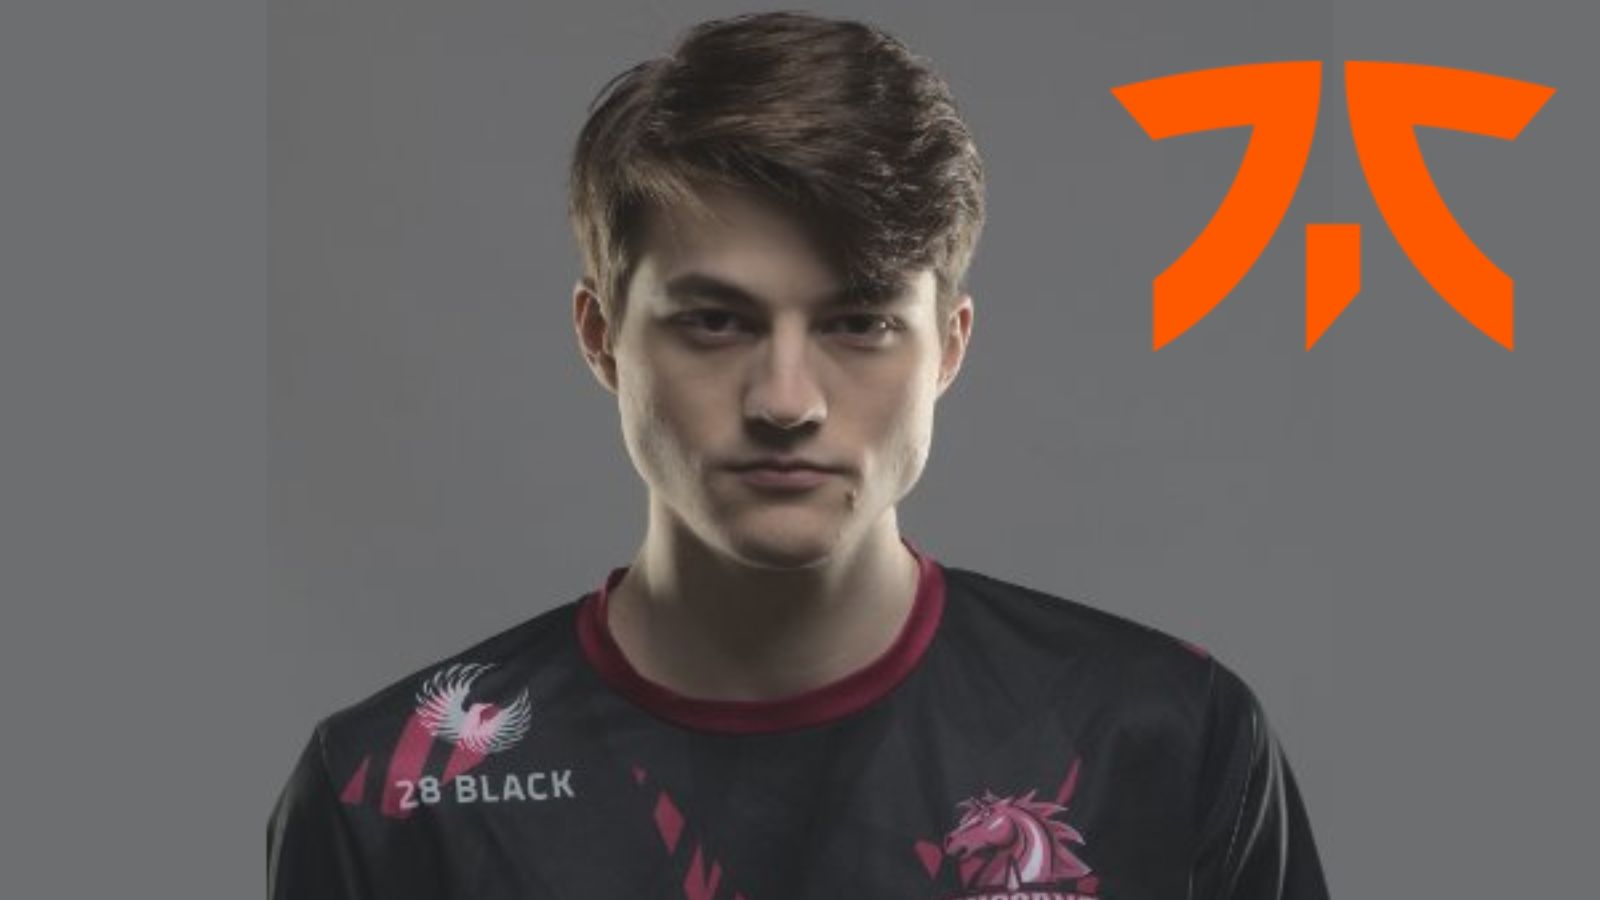 Fnatic AD Reptile kicked for Offensive Summoner Name